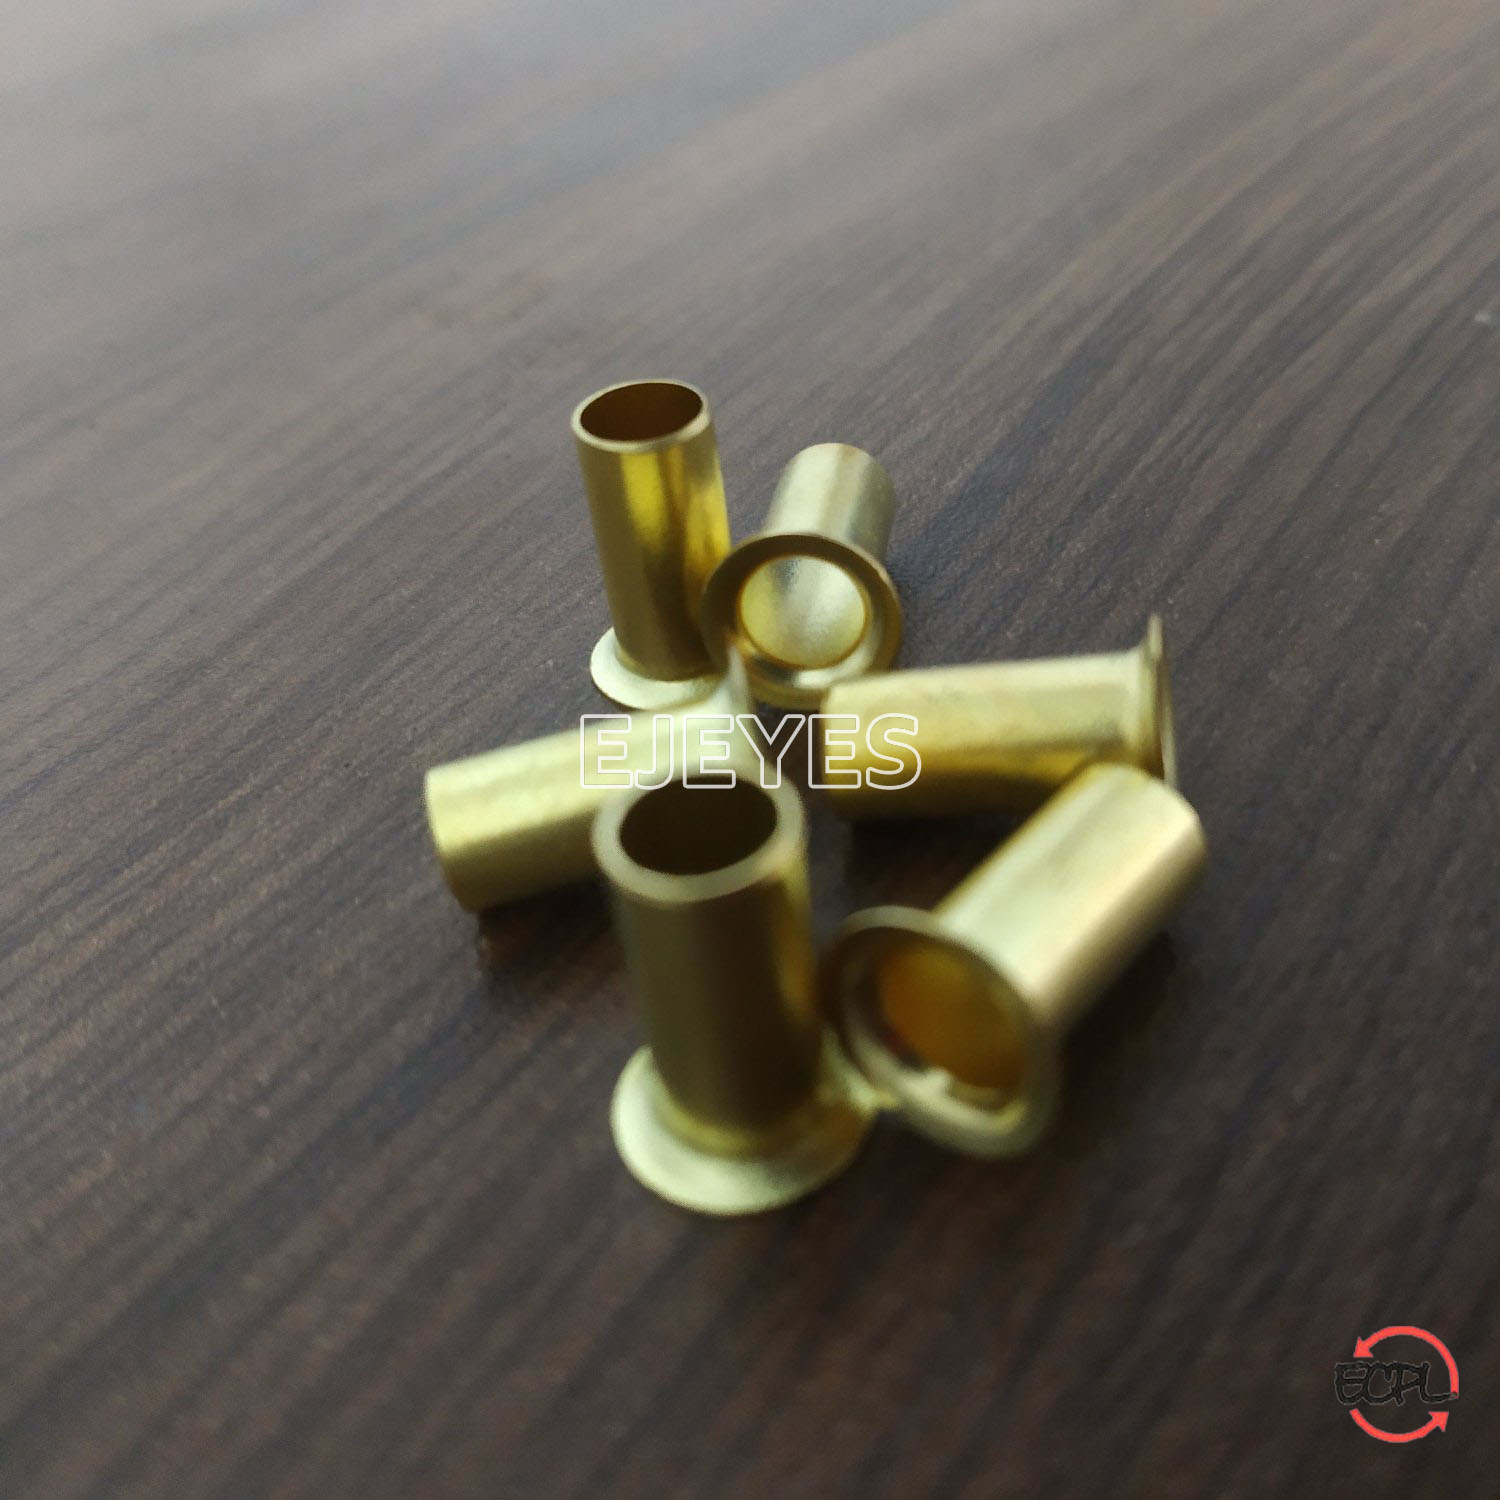 Brass tubular rivet 2115: A versatile and dependable hardware component, ideal for various assembly and repair tasks.